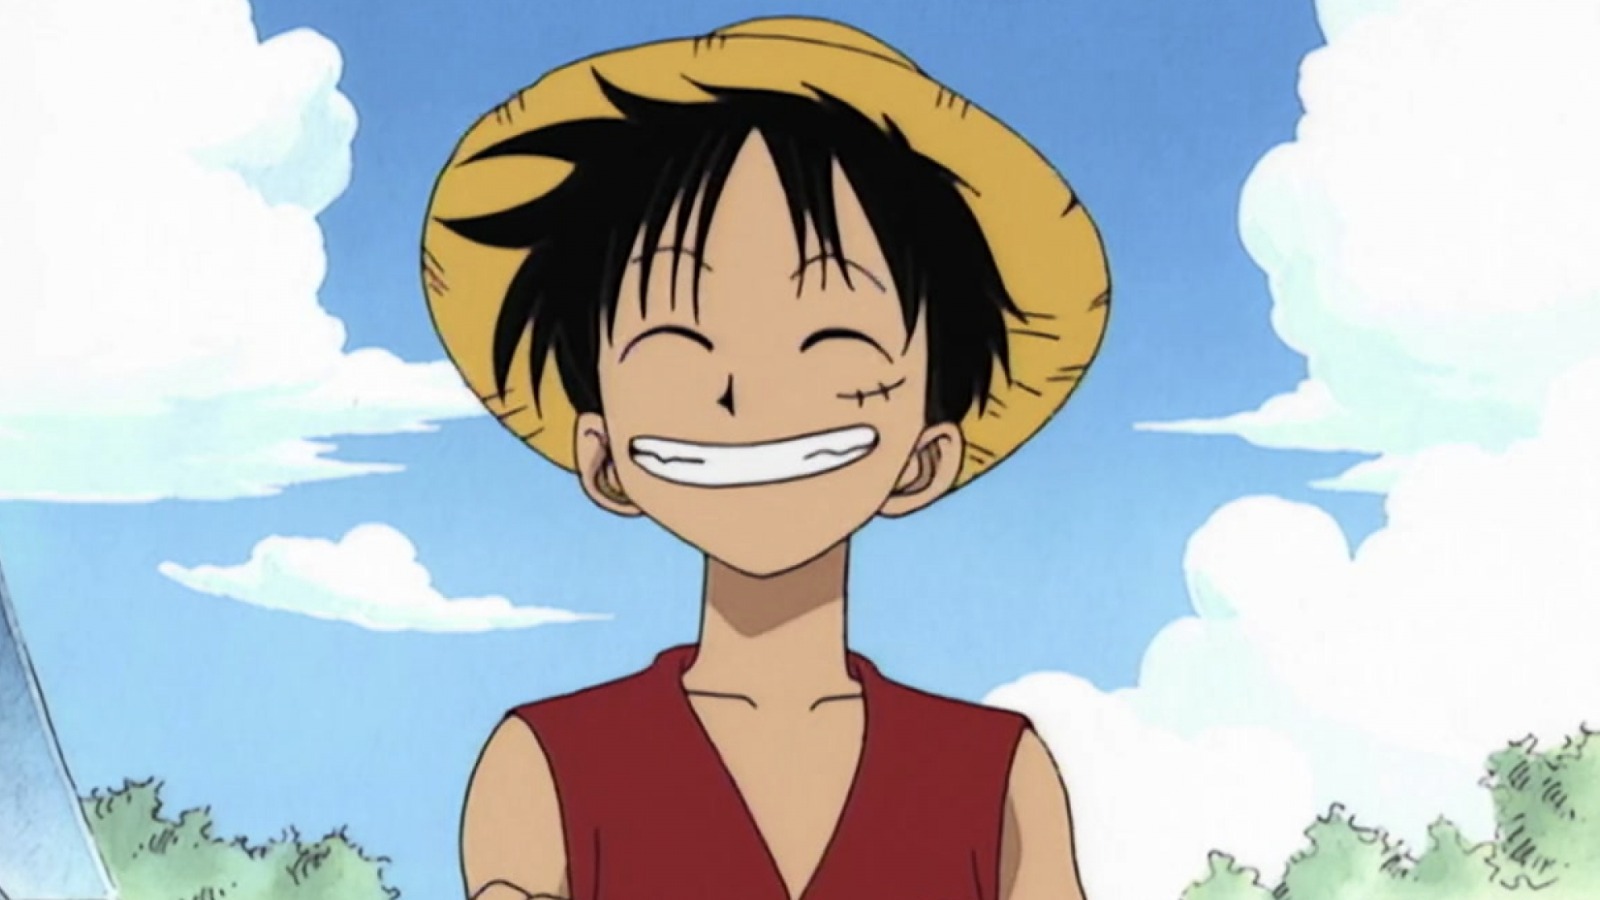 Download One Piece Anime Luffy Smiling Picture | Wallpapers.com-demhanvico.com.vn